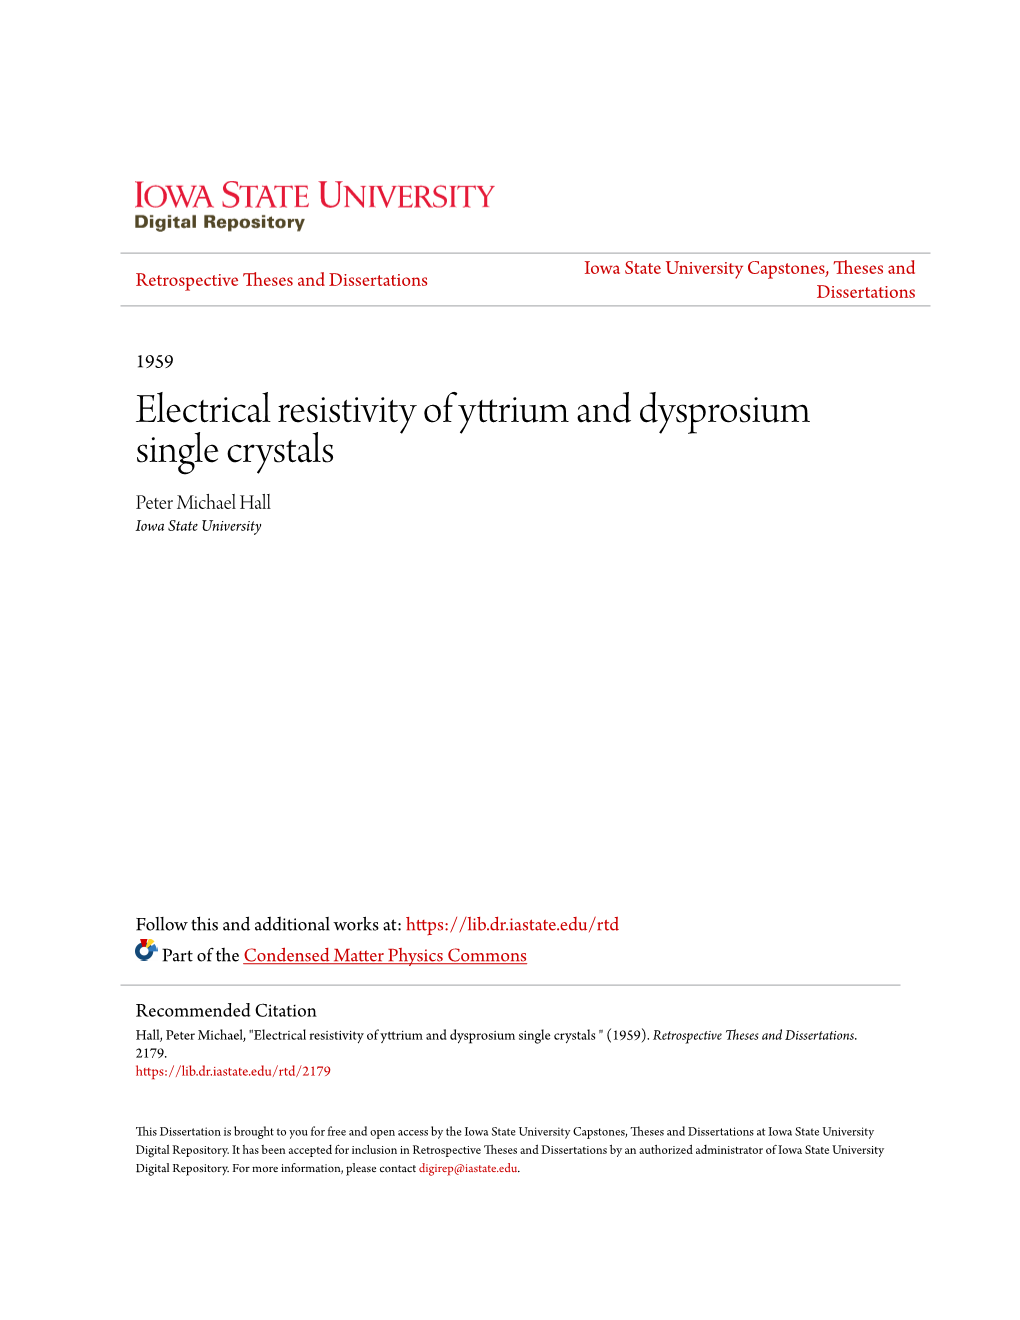 Electrical Resistivity of Yttrium and Dysprosium Single Crystals Peter Michael Hall Iowa State University